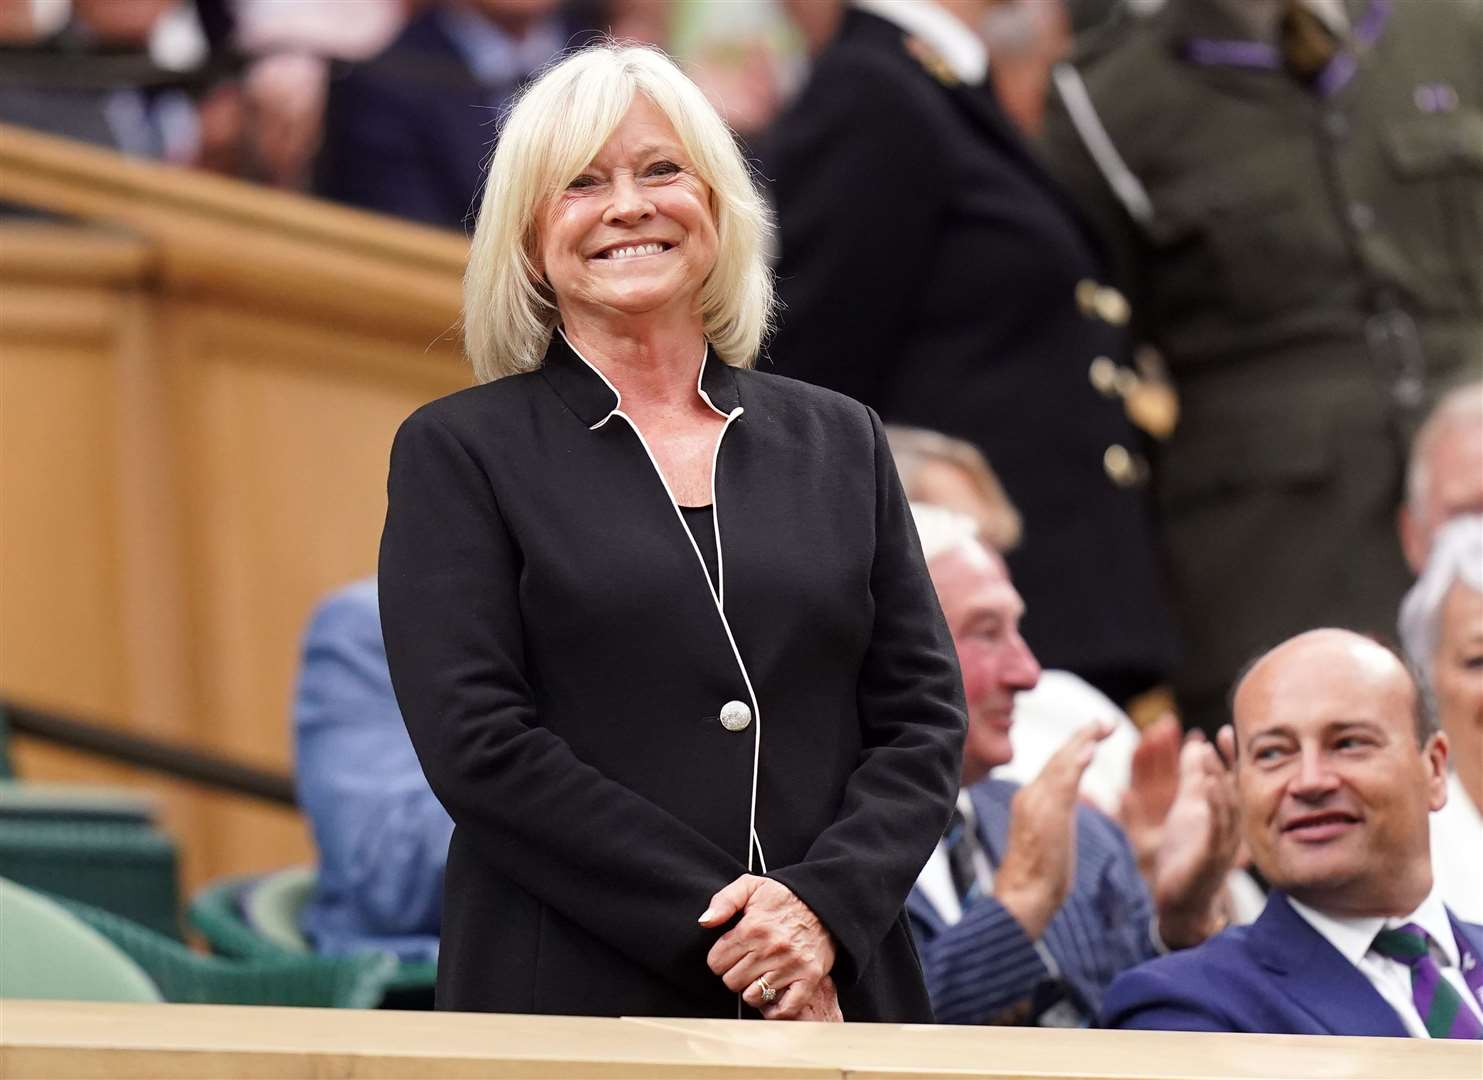 Sue Barker in the royal box on day six (Adam Davy/PA)